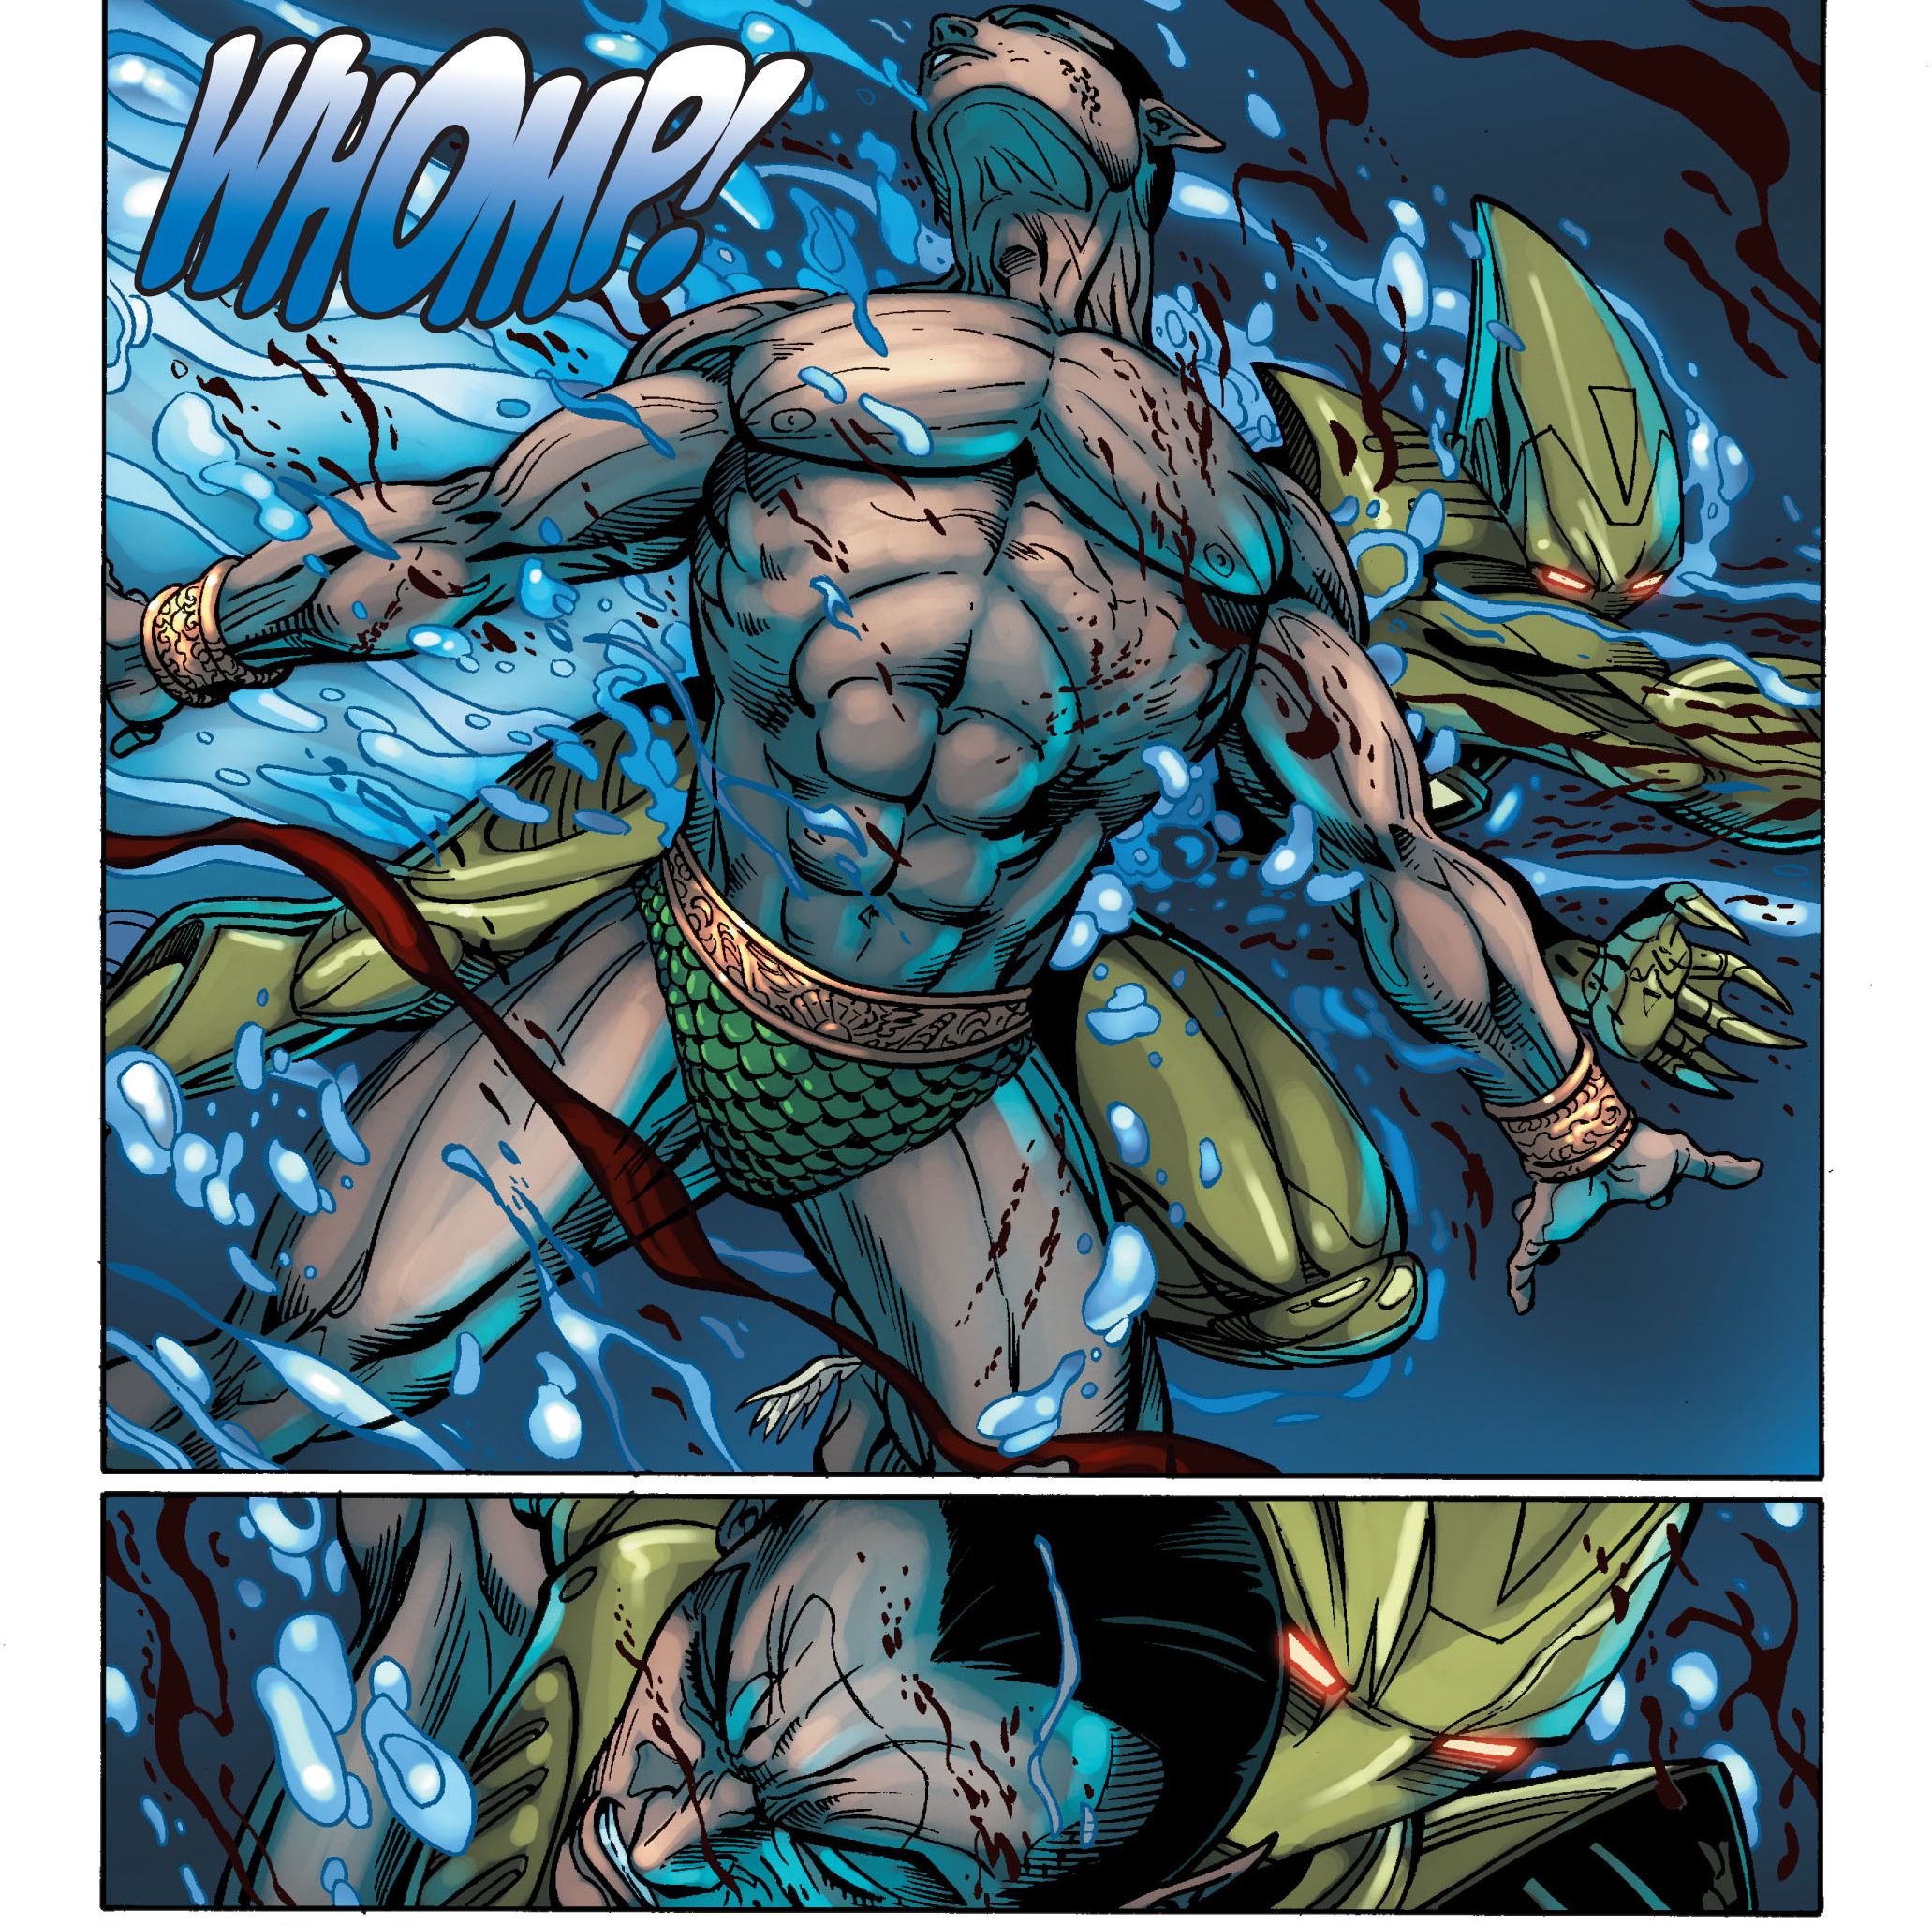 MCU Fans Deserved Iron Man vs Namor – If Only to Introduce Tony’s Argonaut Armor